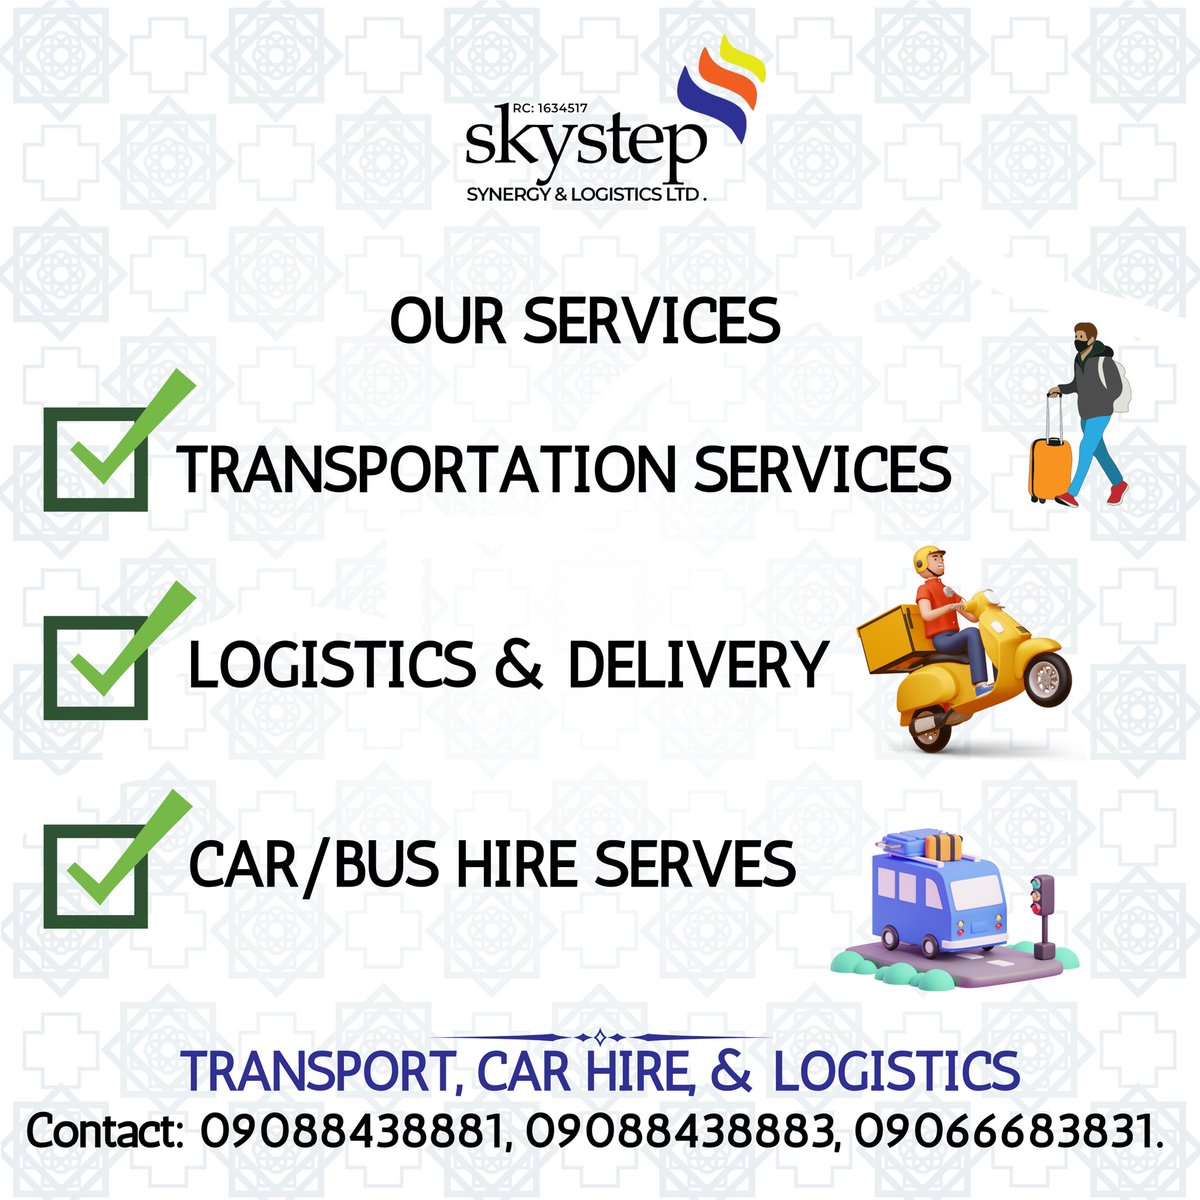 At Skystep we offer the following services #transportation #logistics and #delivery & we also offer #carhire / #bushire

Come for premium services at affordable price only with Skystep.

Call us now